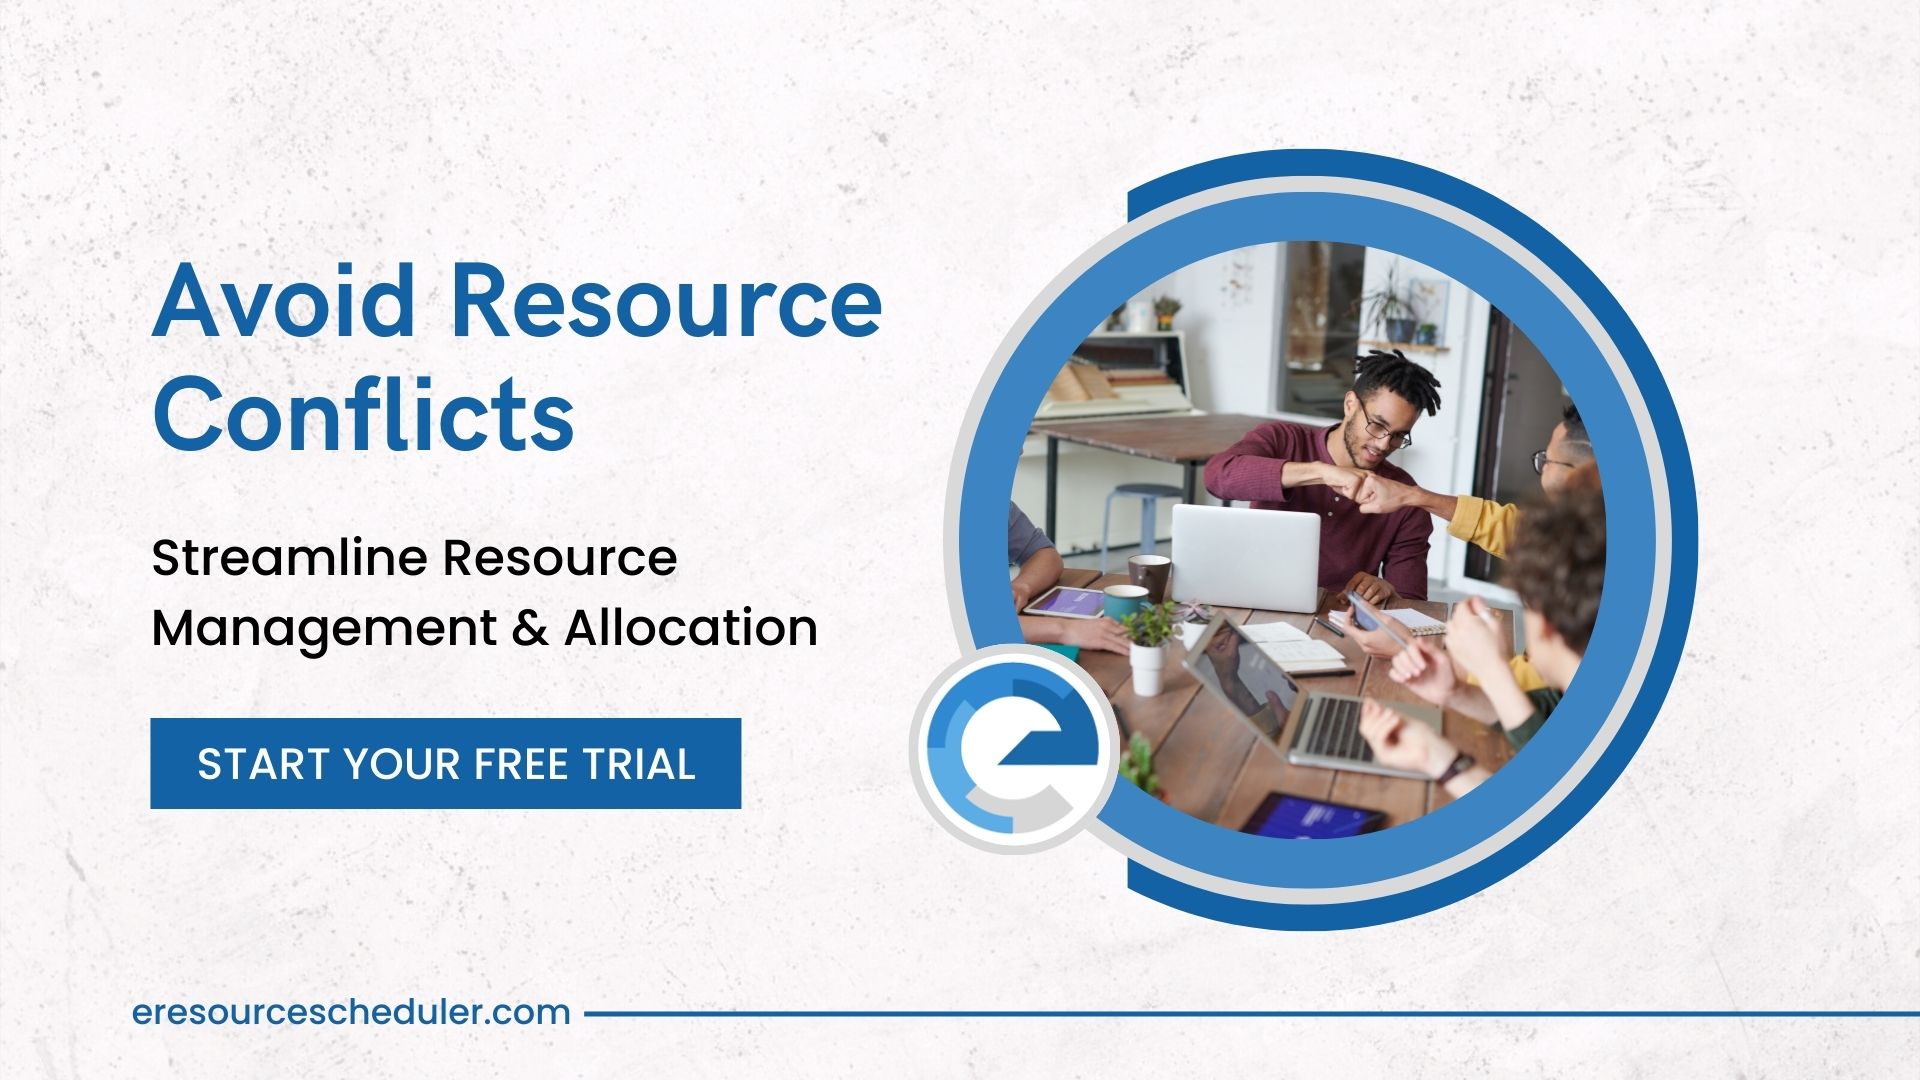 Resource management and allocation